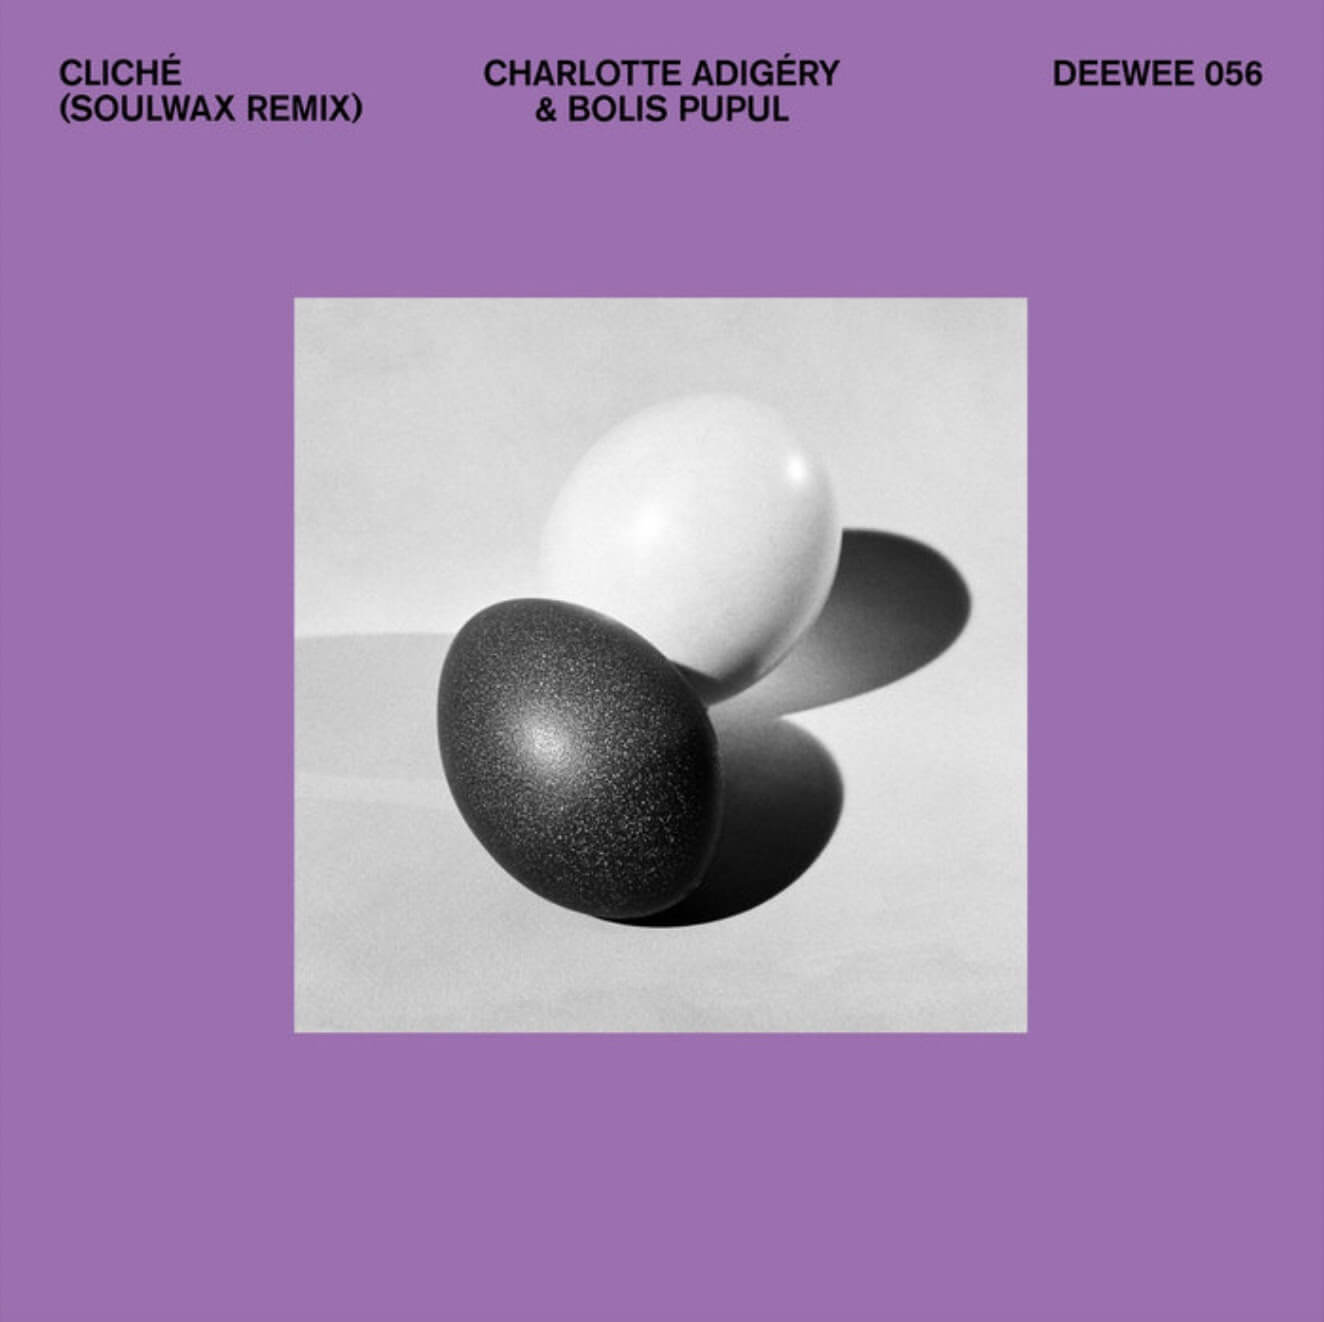 Charlotte Adigéry and Bolis Pupul have shard their remix of Soulwax's "Cliche." The track is now available via DSPs